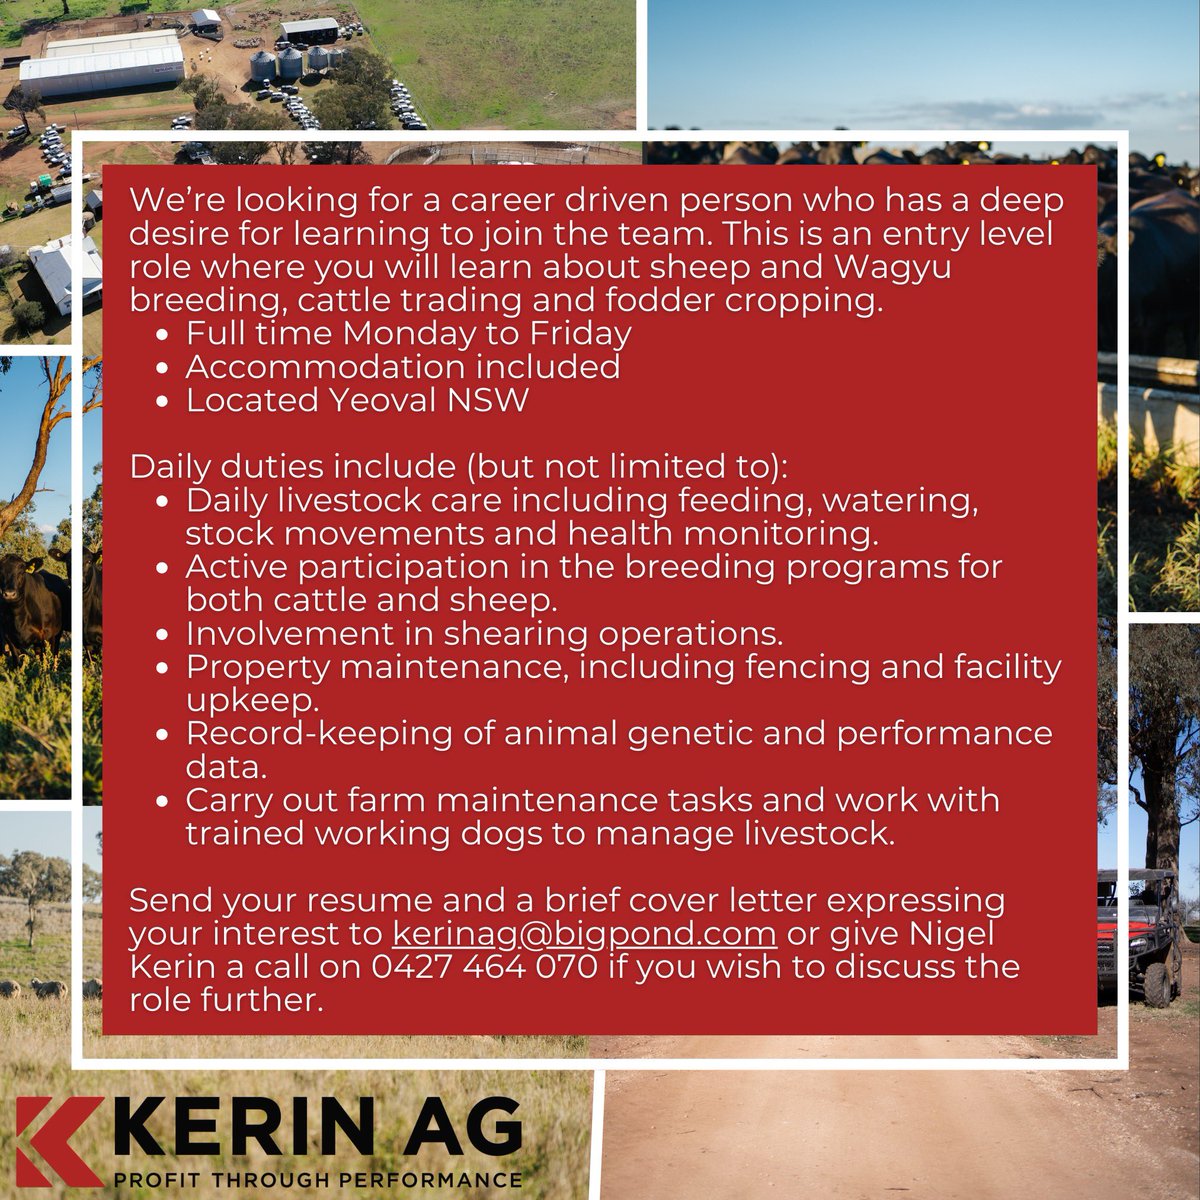 We’re hiring!
Send your resume and a brief cover letter expressing your interest to kerinag@bigpond.com or give Nigel Kerin a call on 0427 464 070 if you wish to discuss the role further. 

#AgricultureJobs #FarmWork #AgriCareers #FarmingJobs #AgJobs #JuniorFarmHand